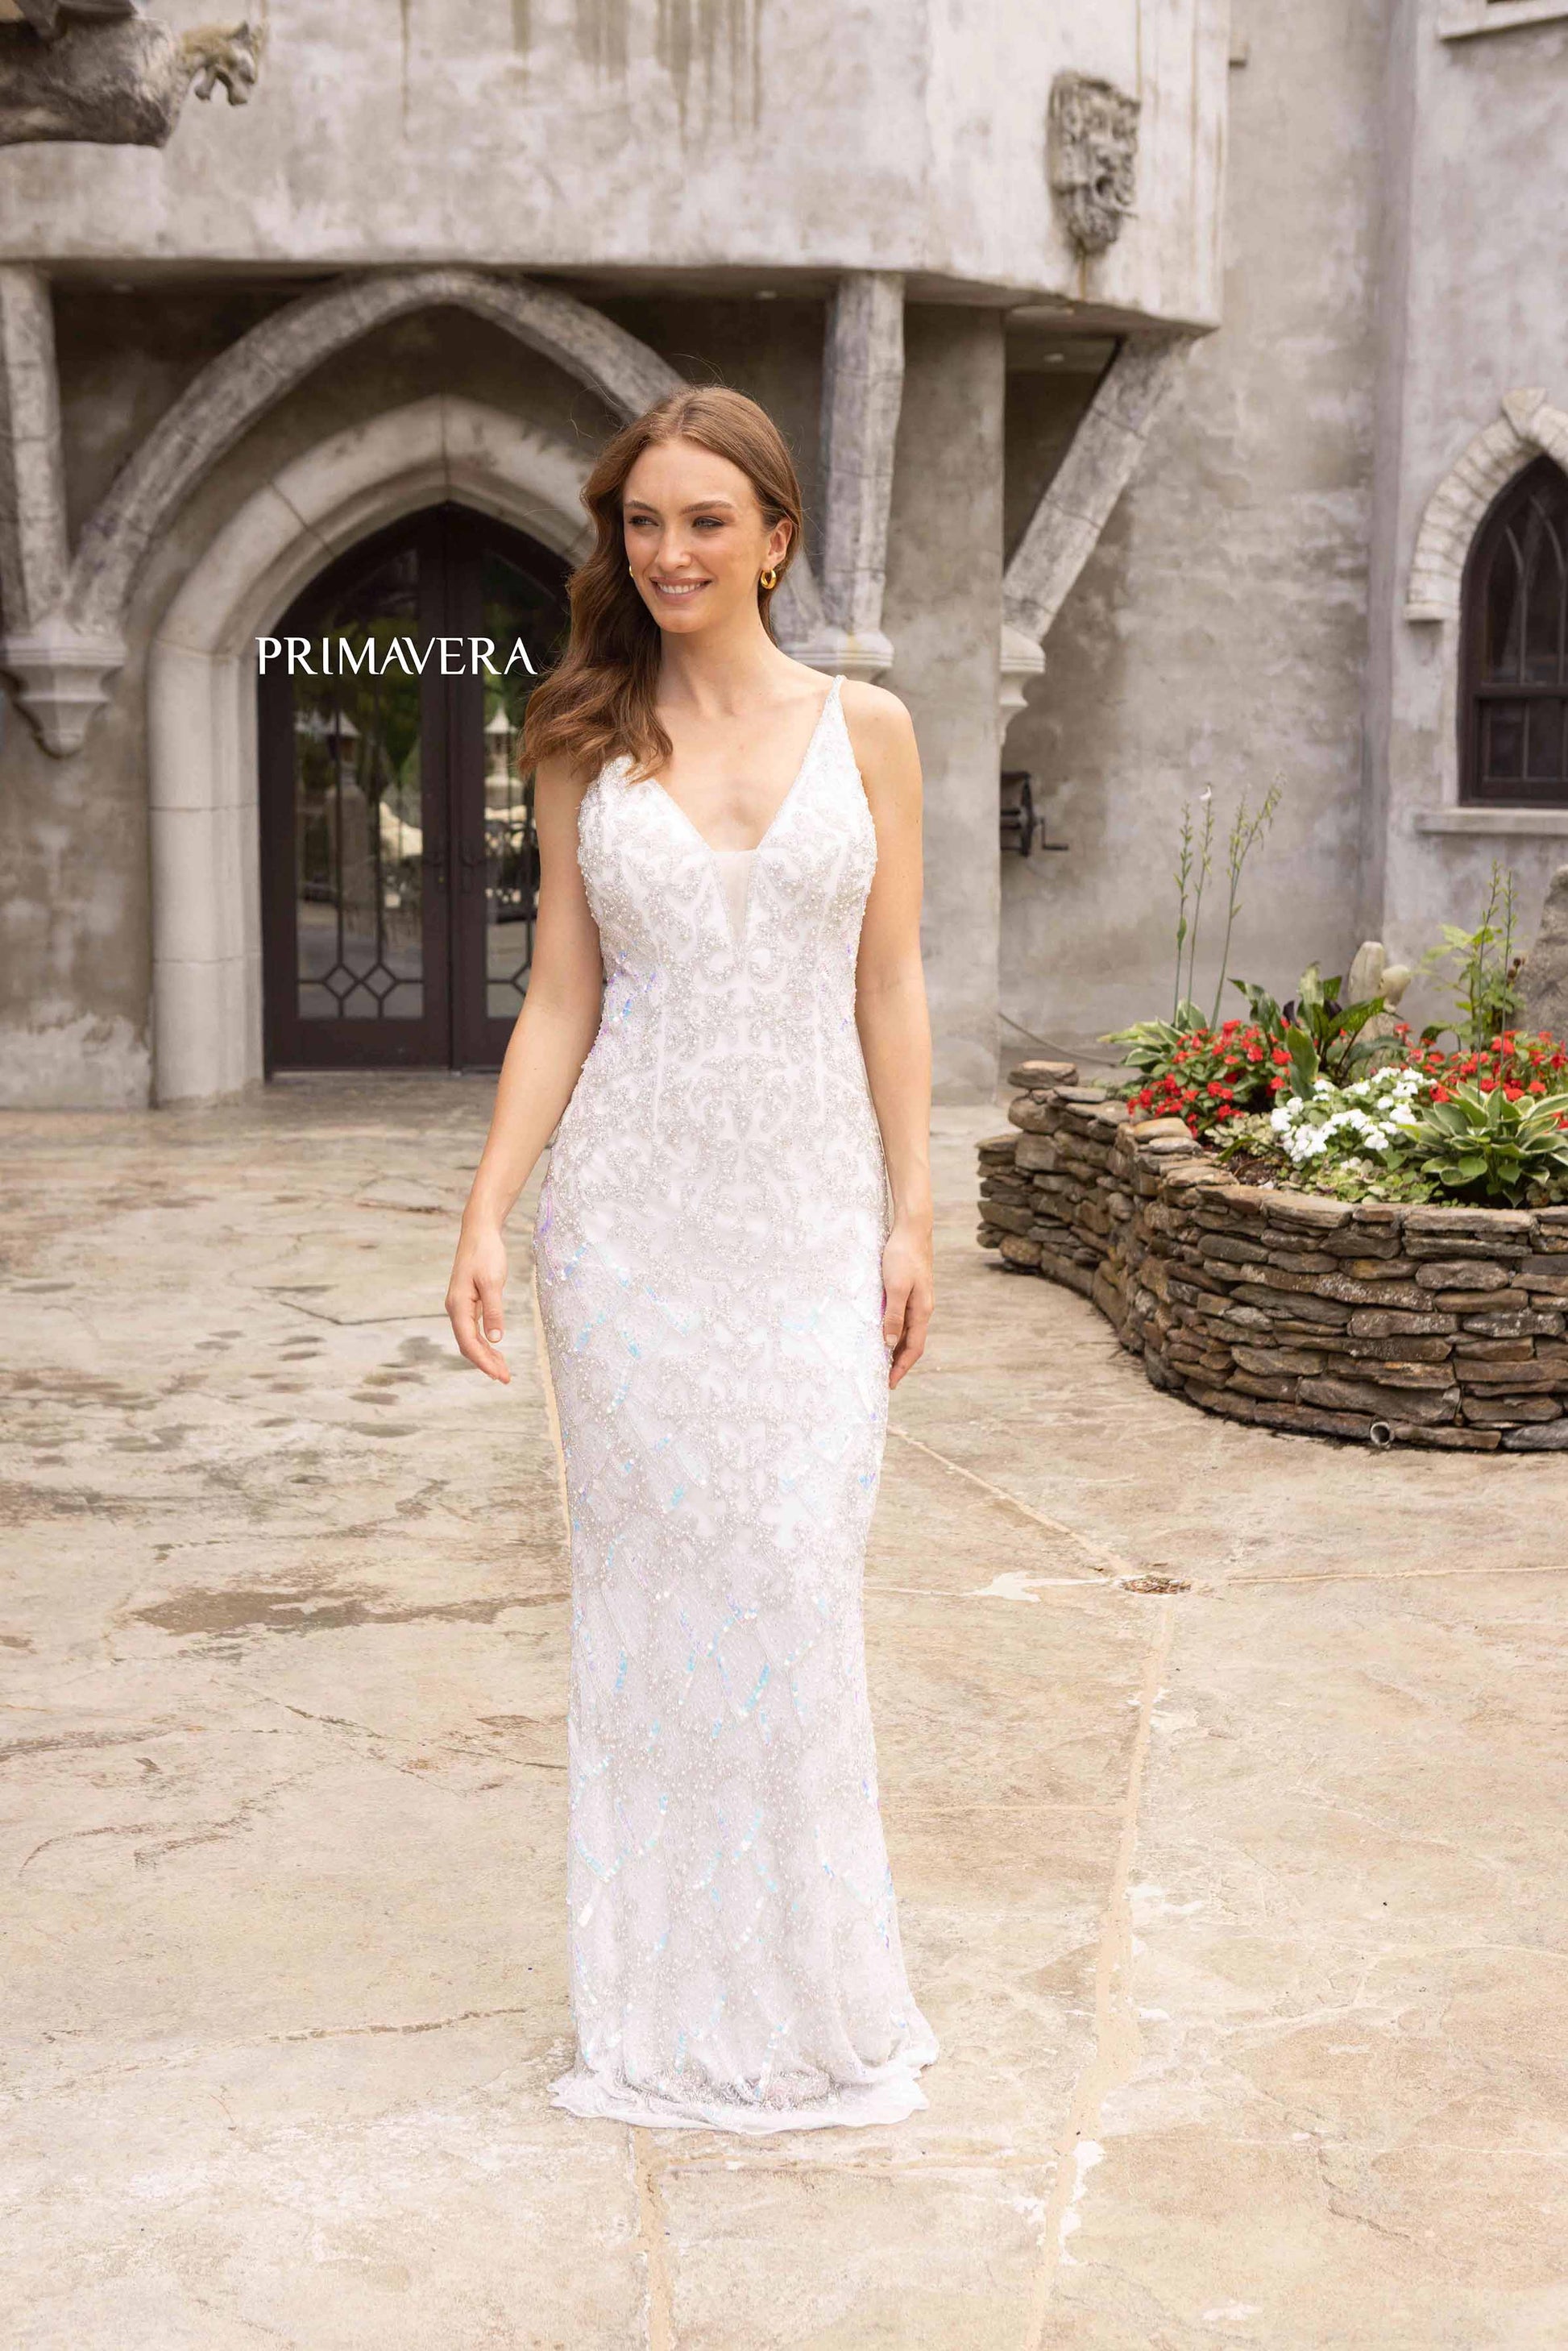 Primavera Couture 3903 Long Fitted Beaded Sequin Formal Prom Dress Evening Gown  V Neckline wide shoulder straps fitted long evening gown.  Colors:  Ivory, Light Turquoise, Sage Green  Sizes:  000-18